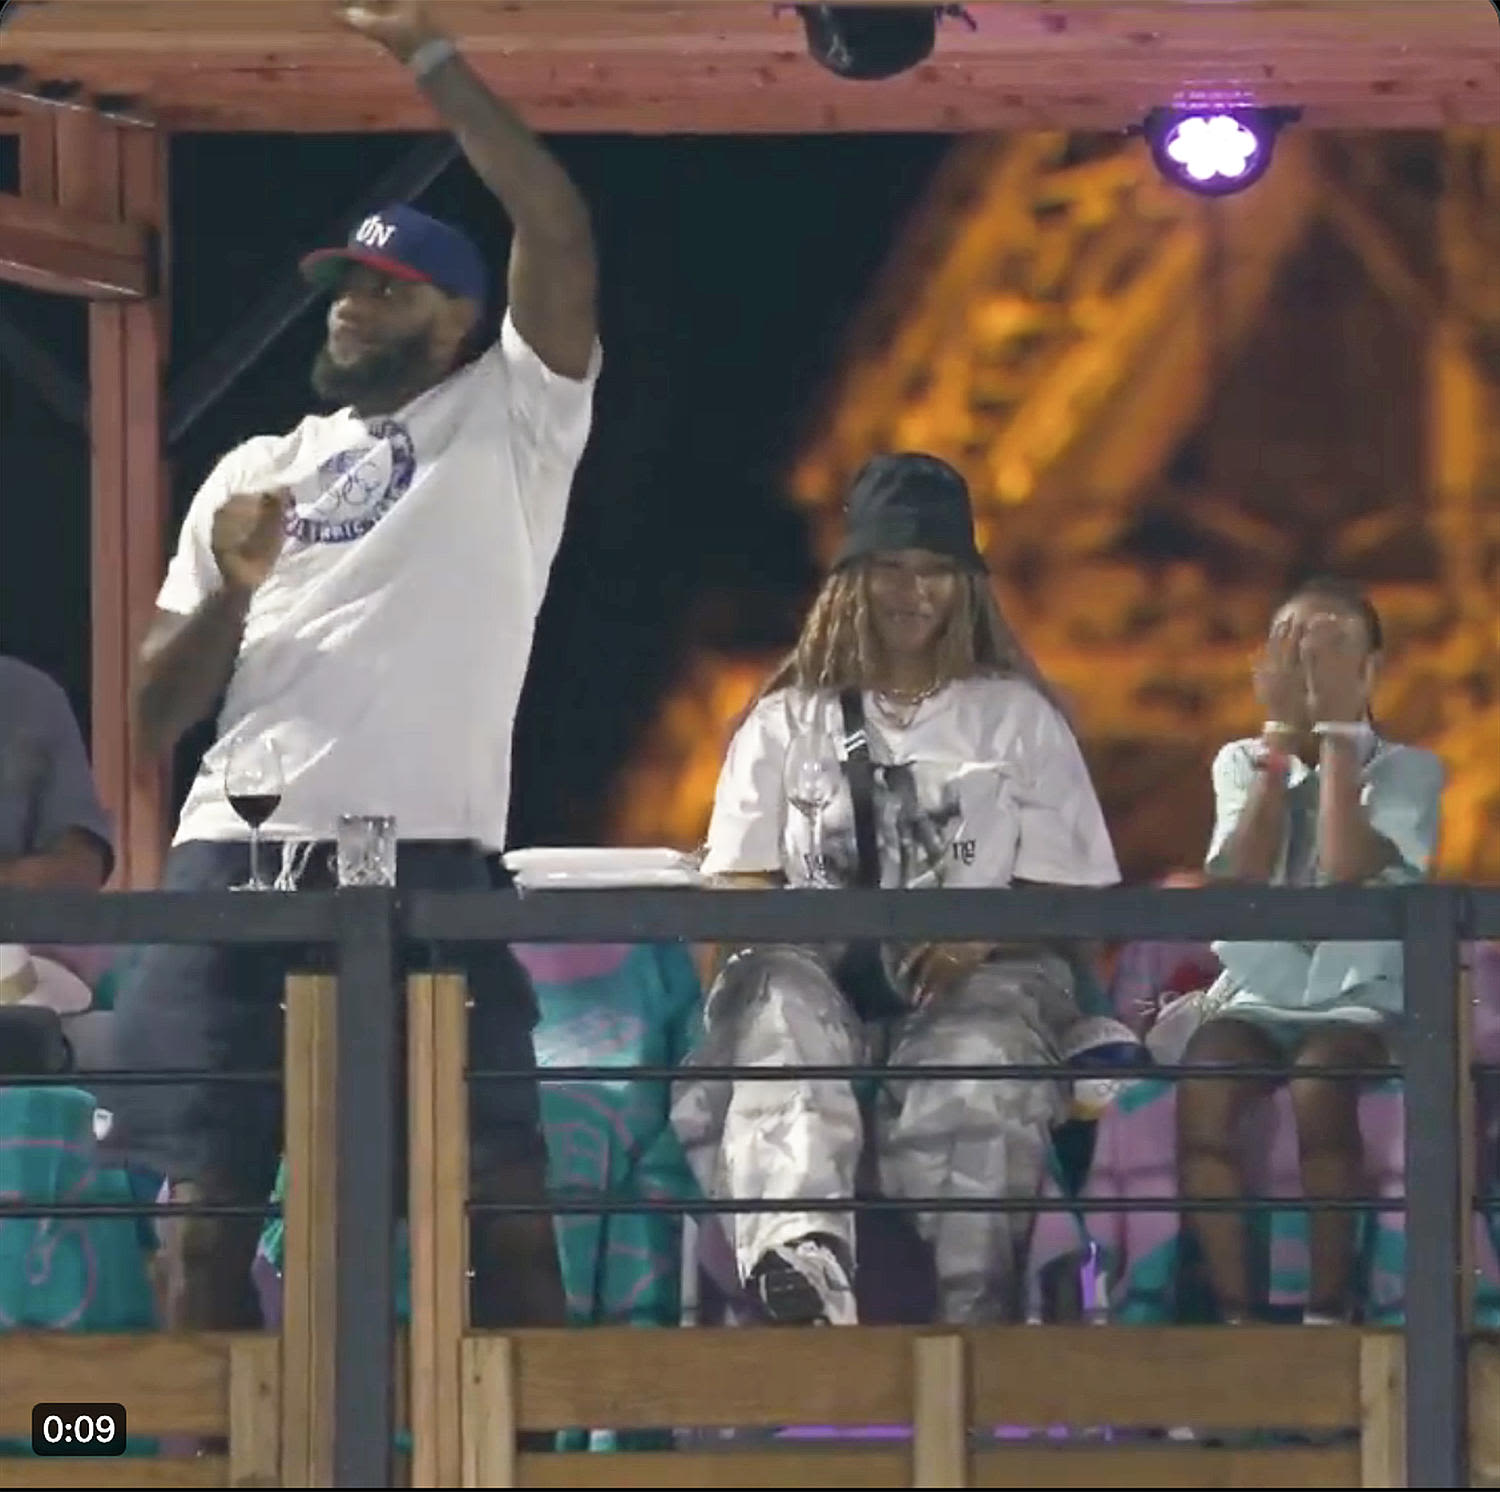 LeBron James mortifies his daughter with 'dad energy’ dancing at the Olympics